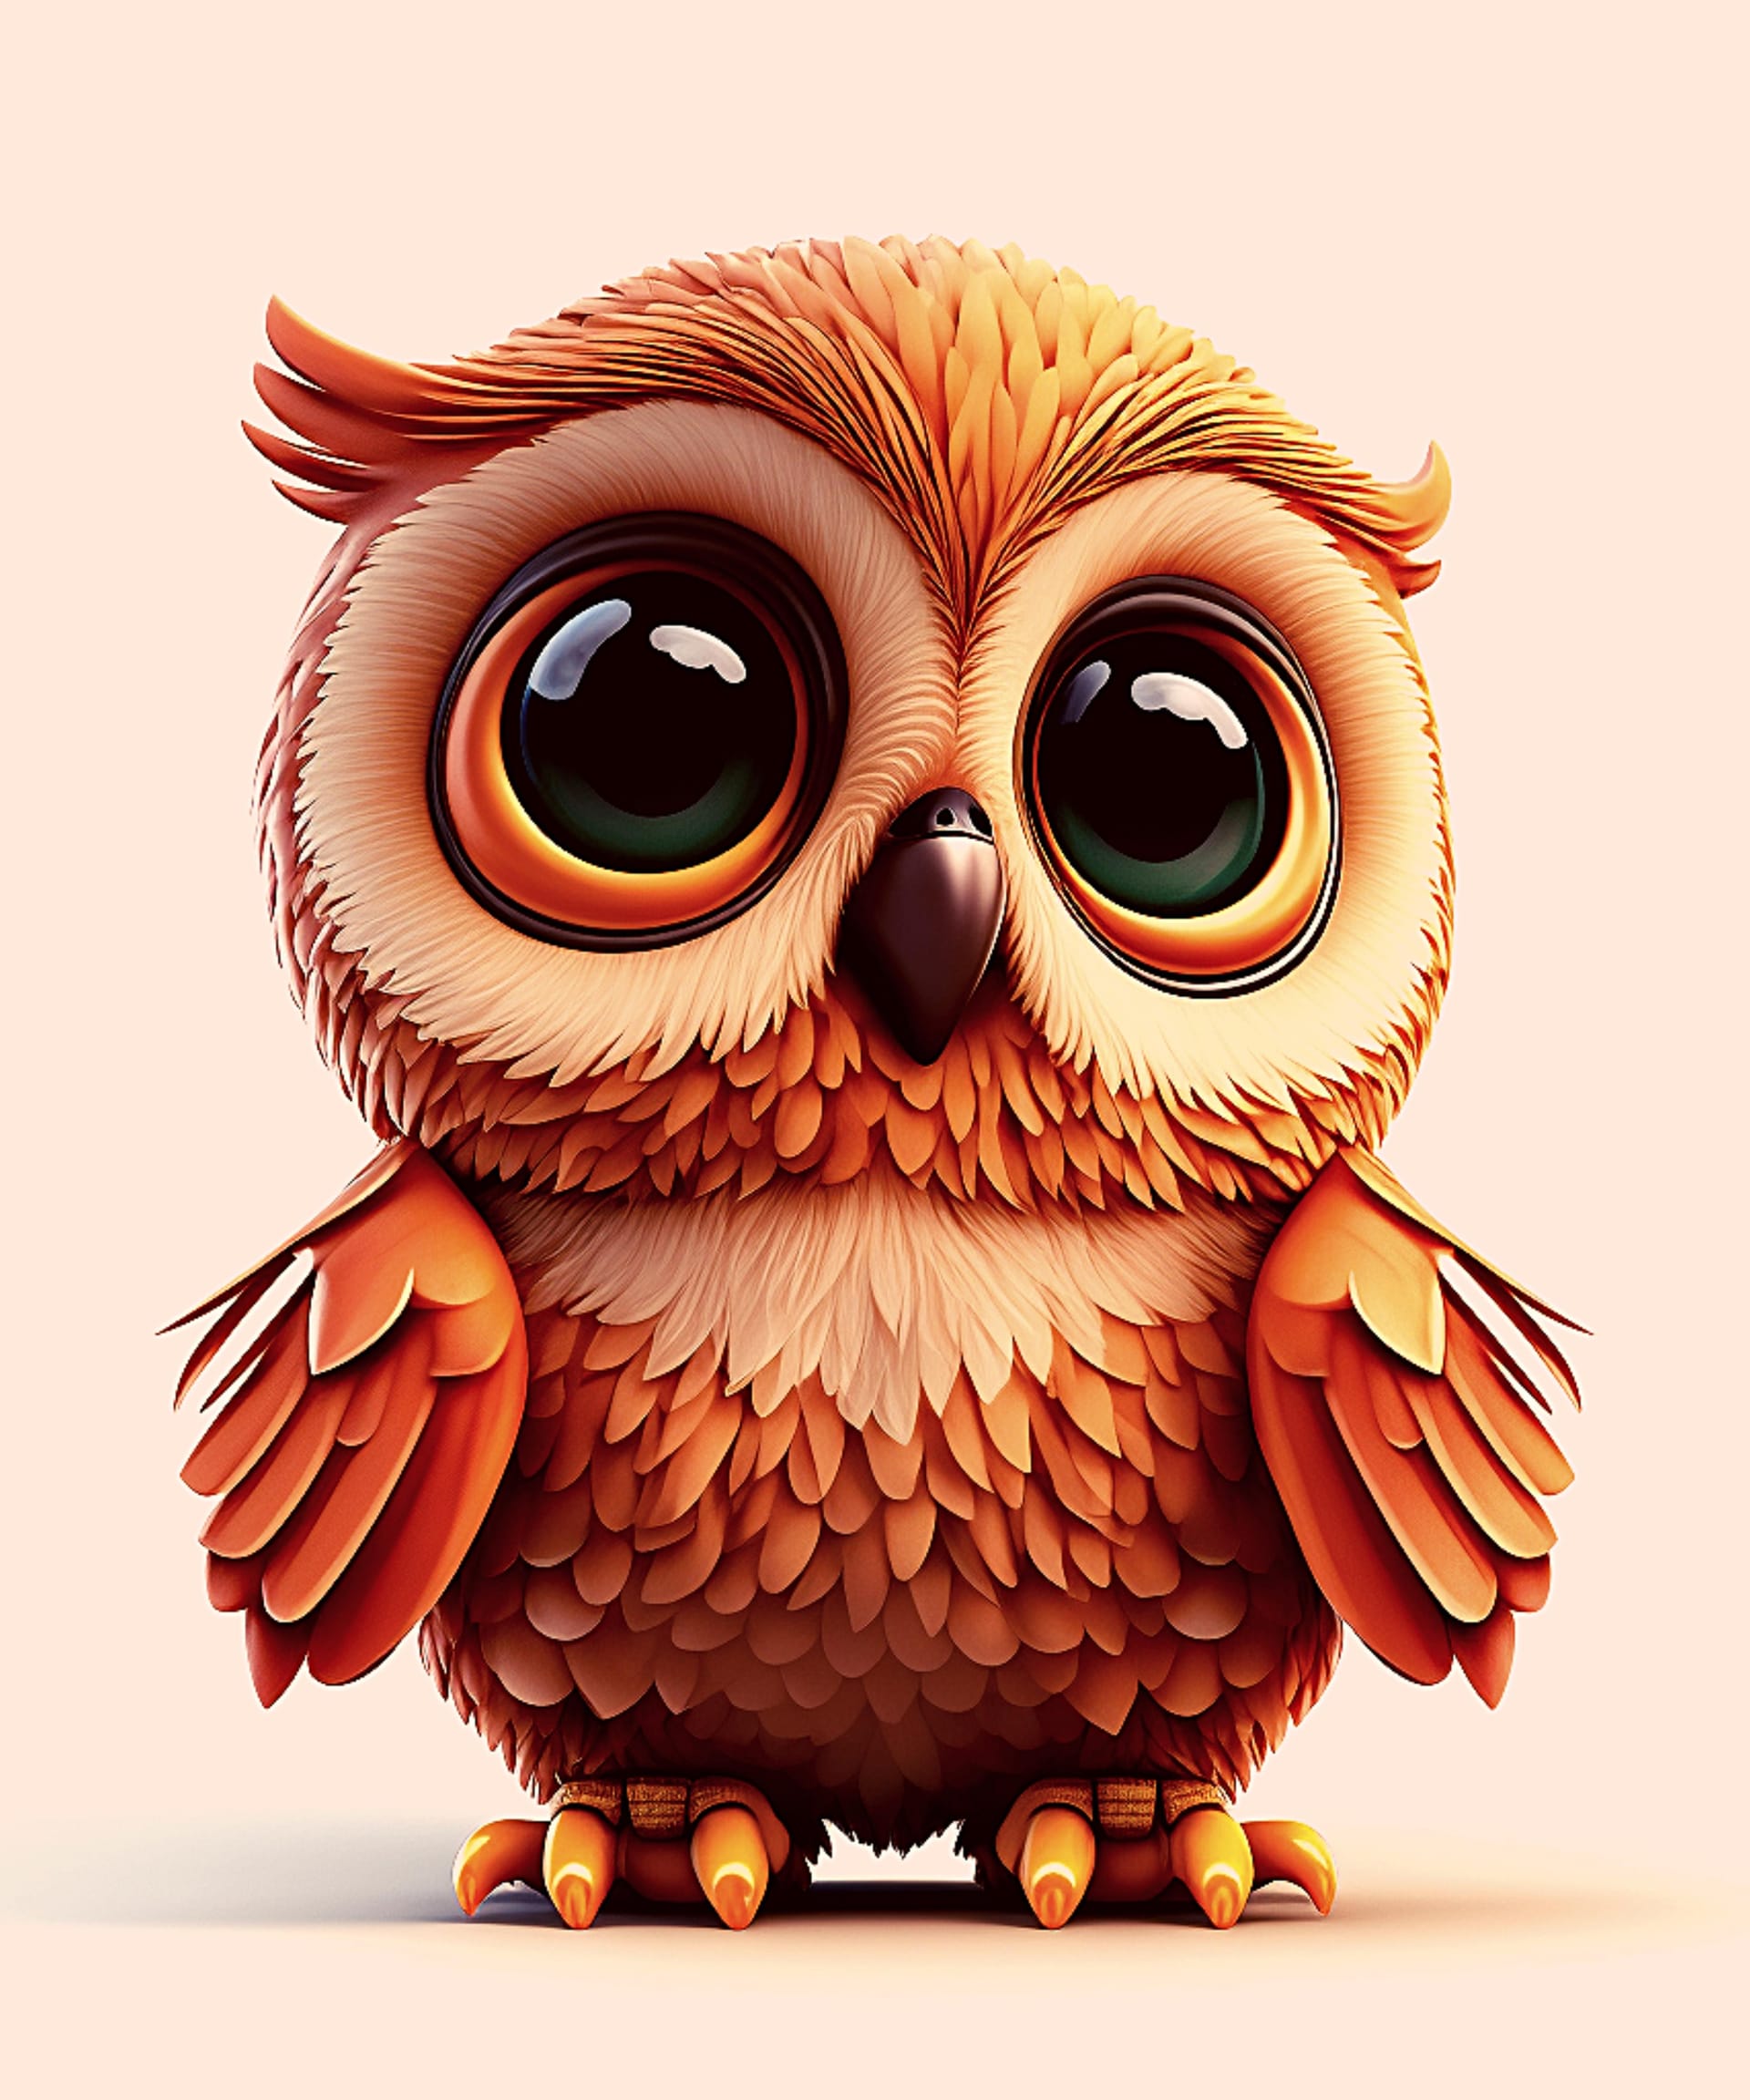 Owl picture baby owl bright image